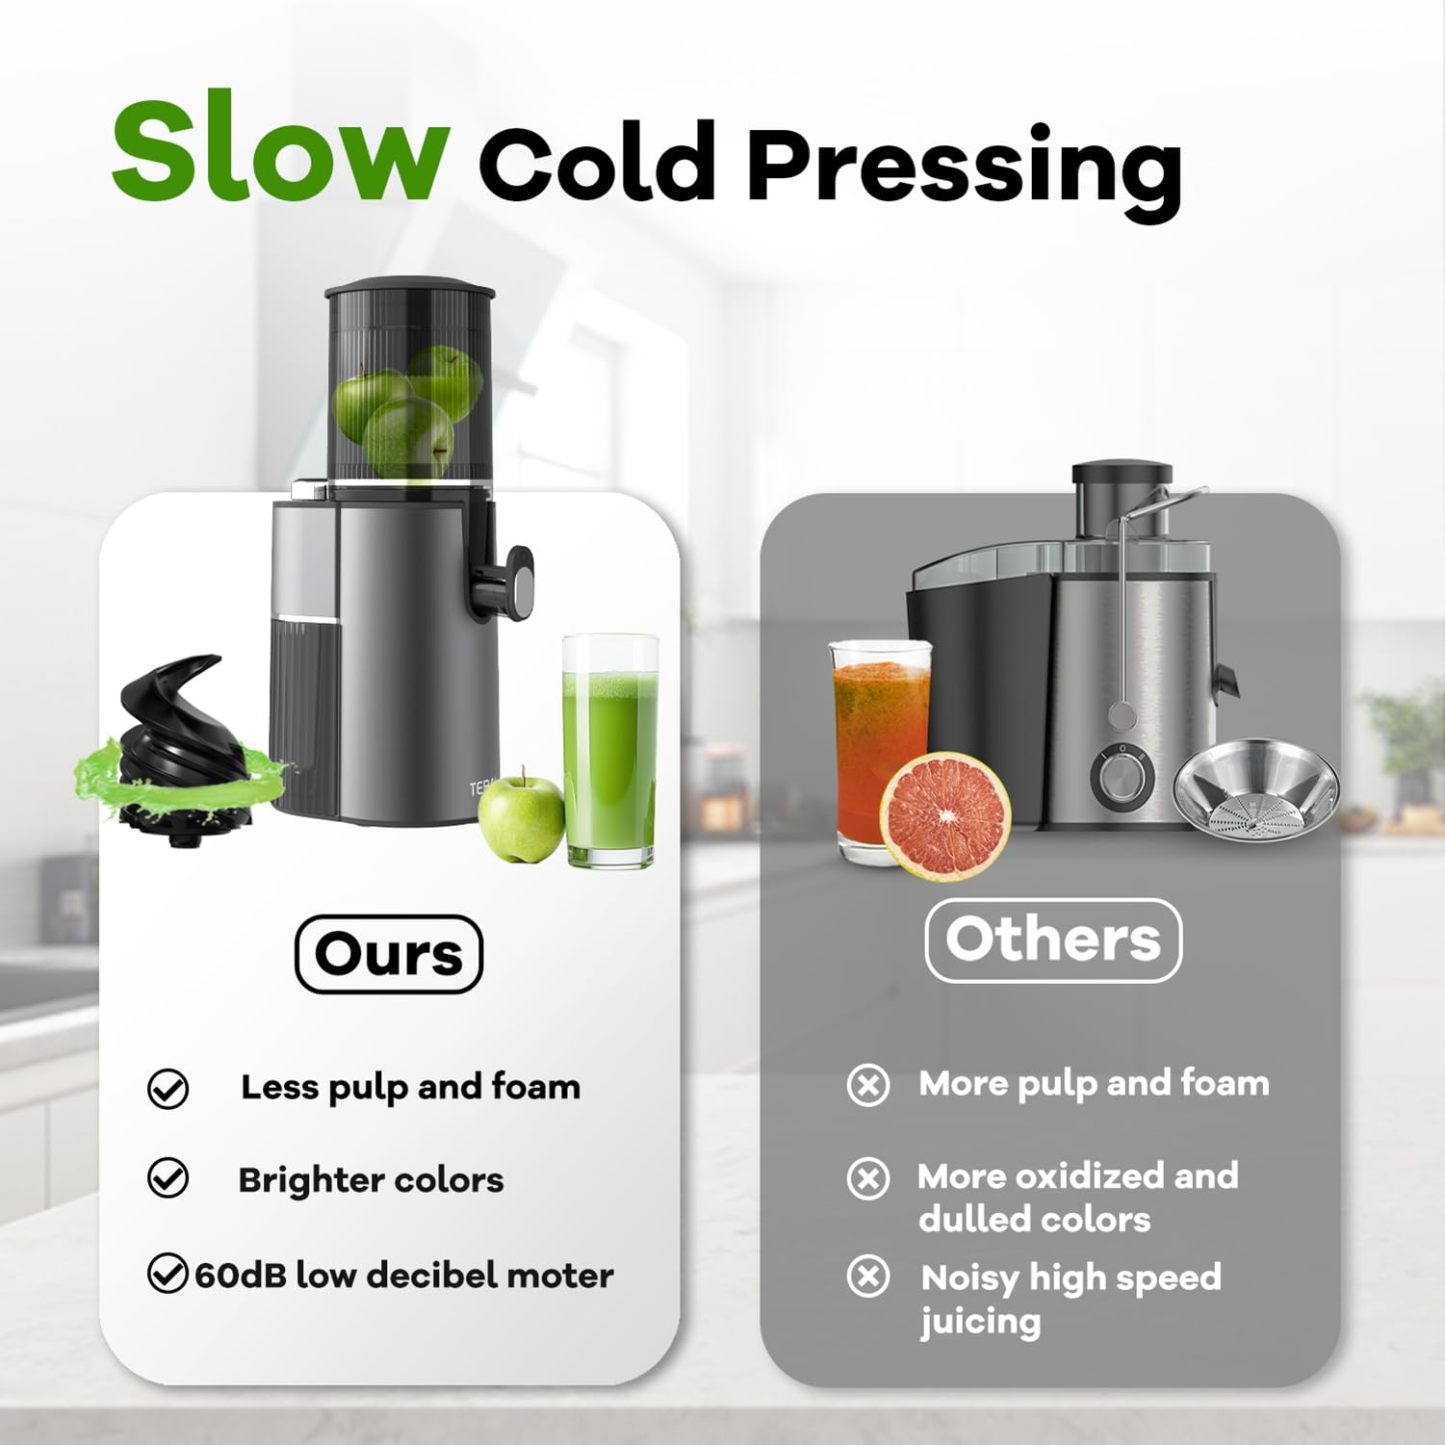 Masticating juicers, cold press juicers with extra large rotating feed chute, slow electric juicers for fruits and vegetables with high juice yield